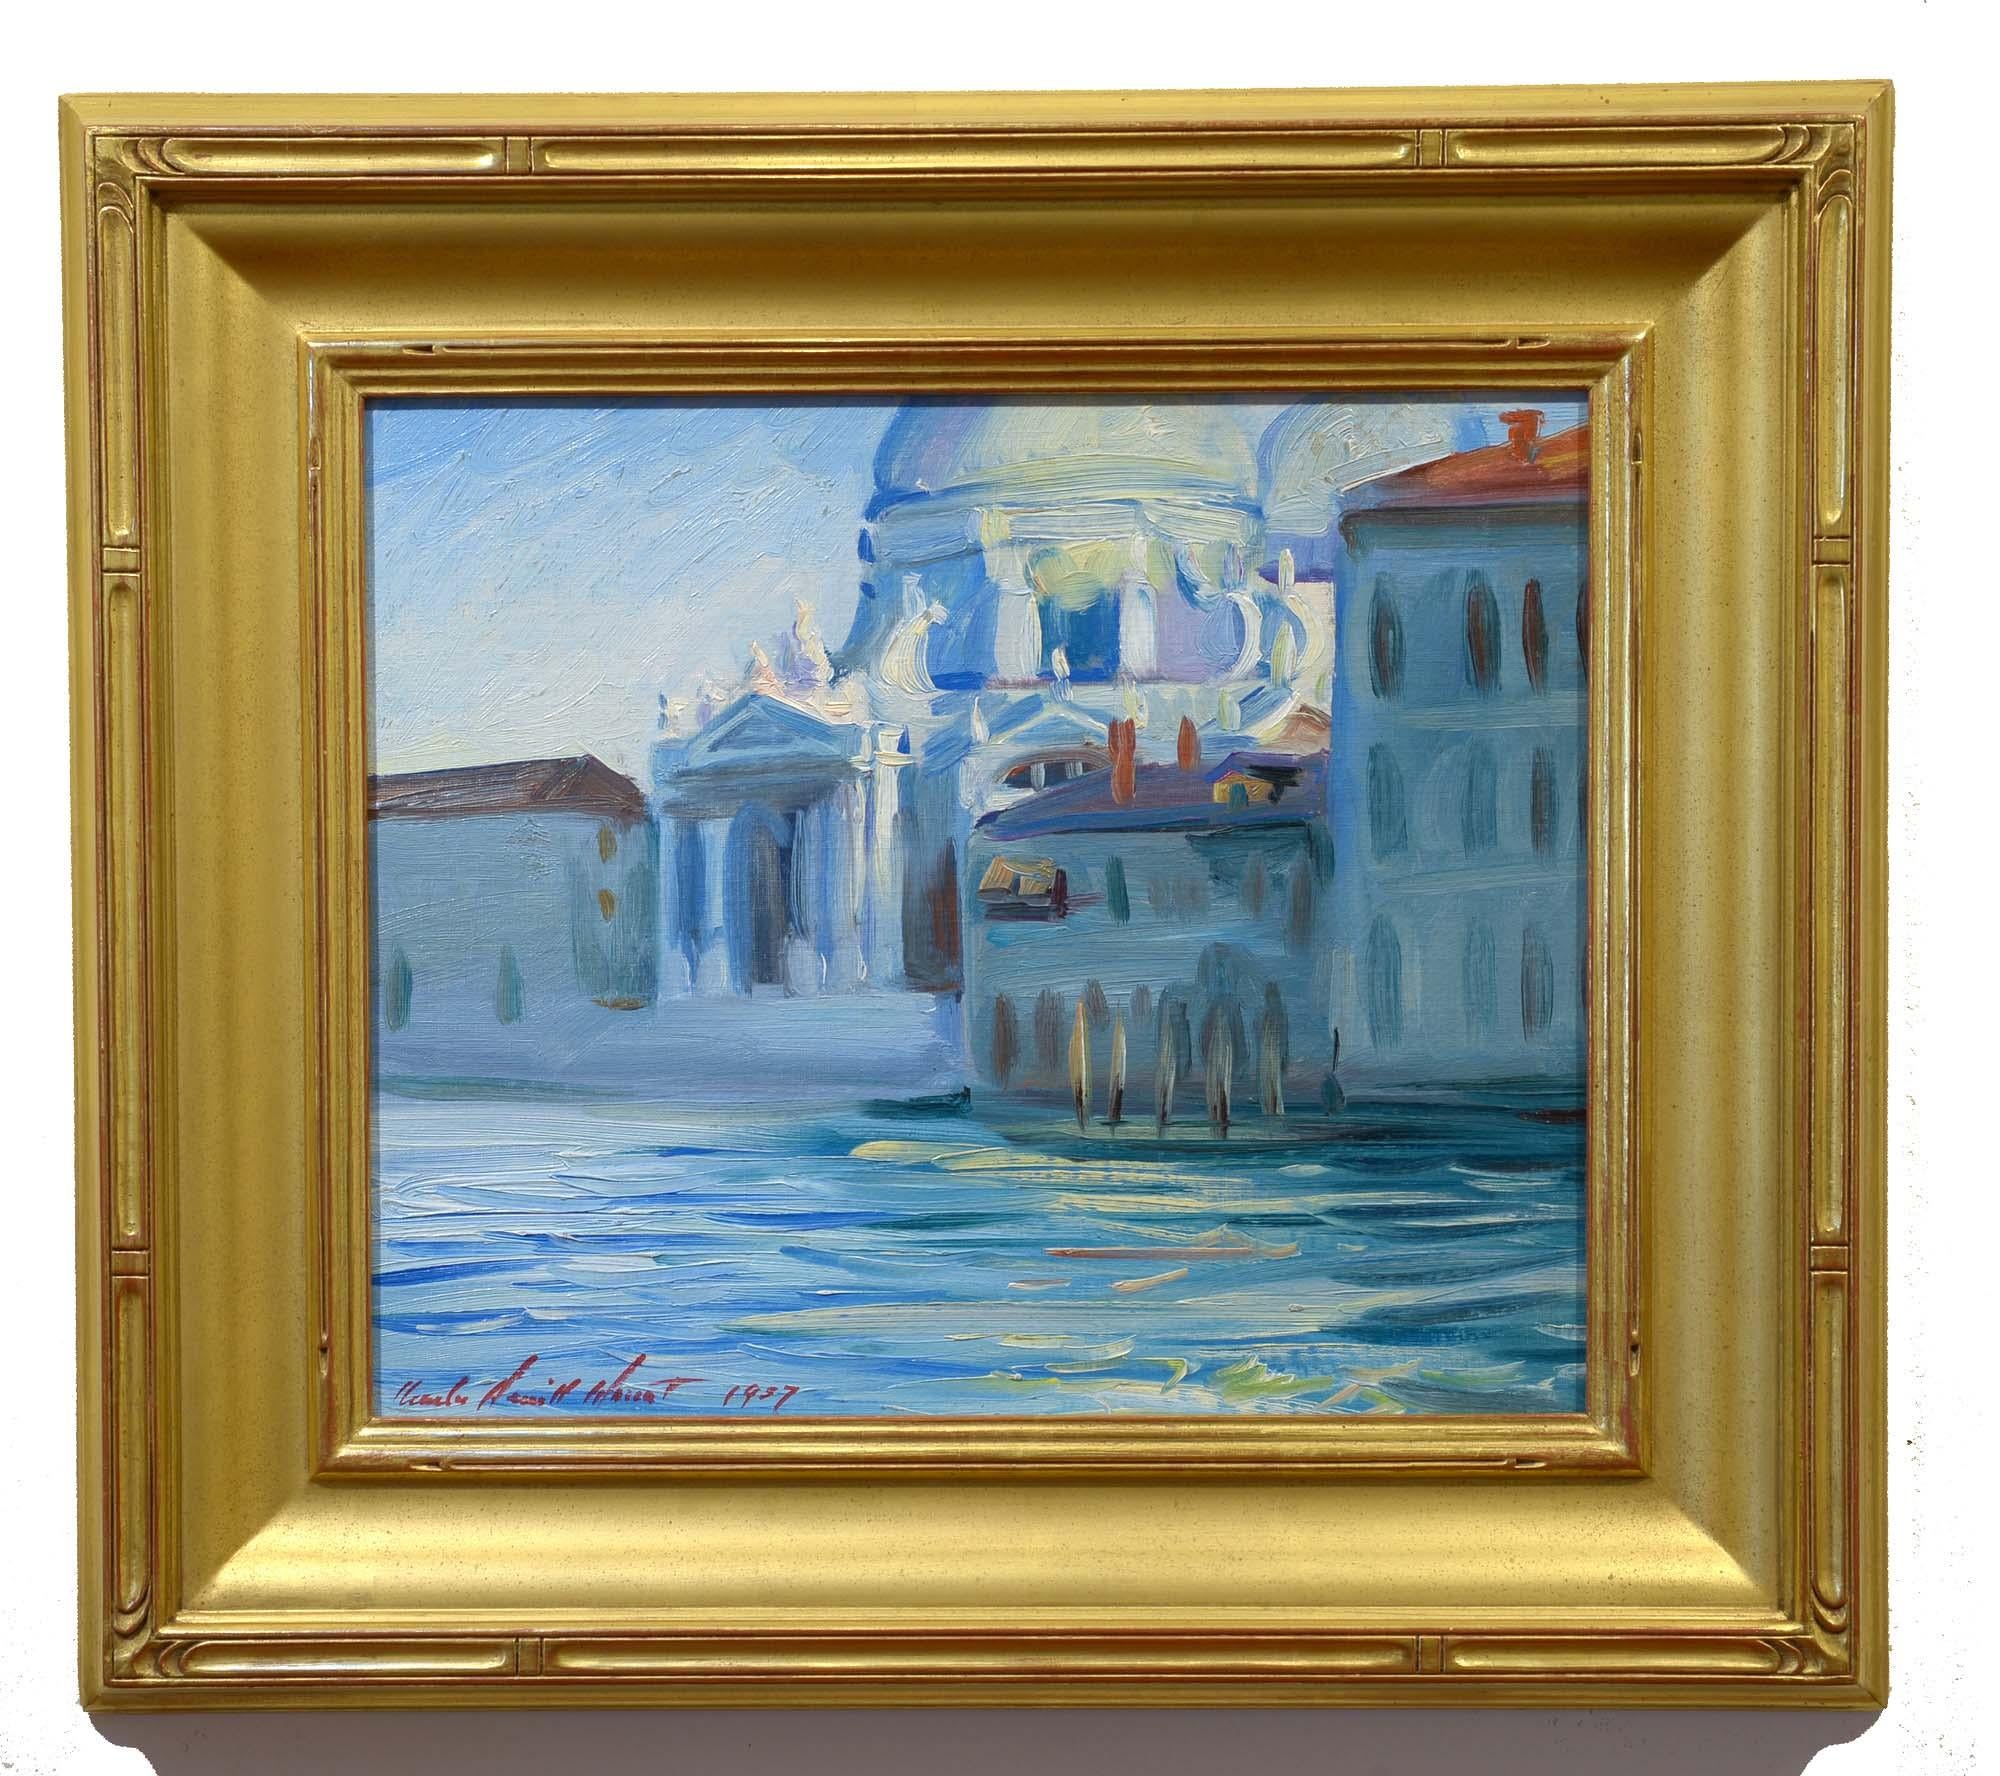 Sunshine Symphony, Venice, Italy, Impressionist, oil, canals, cityscape - Painting by Charles Merrill Mount